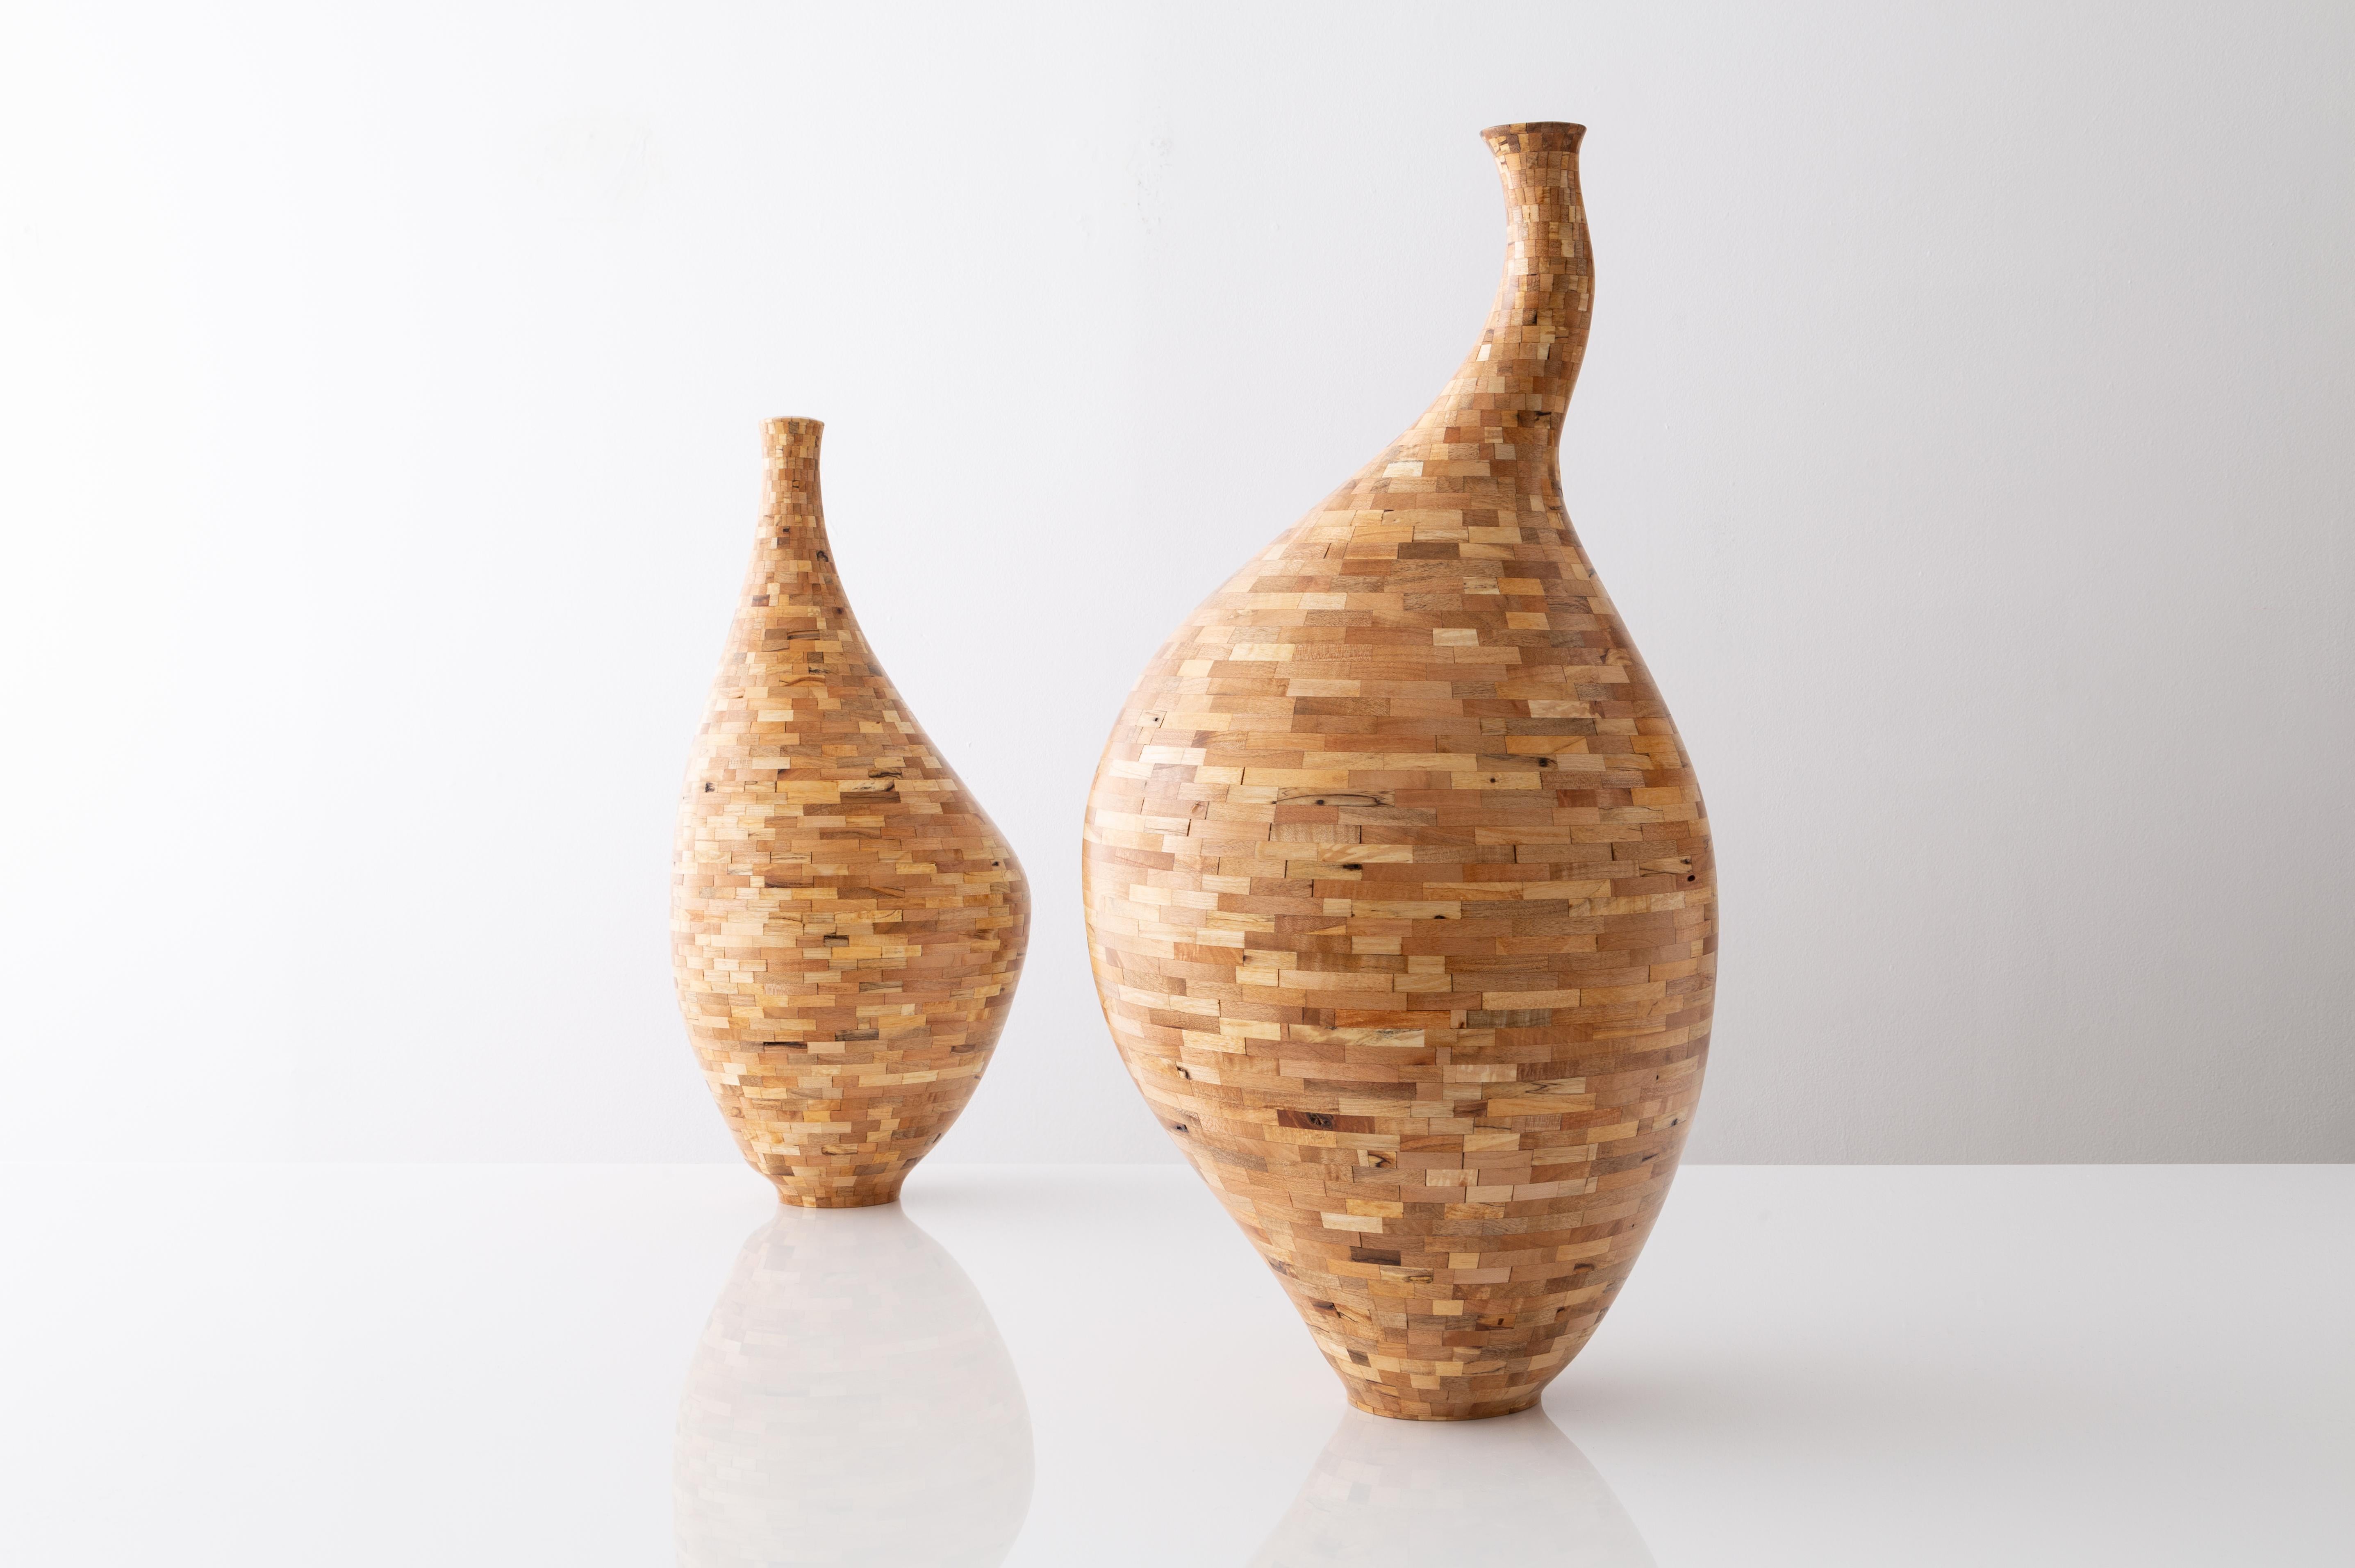 Parquetry Contemporary Spalted Maple Goose Neck Vase #1 by Richard Haining, Available Now